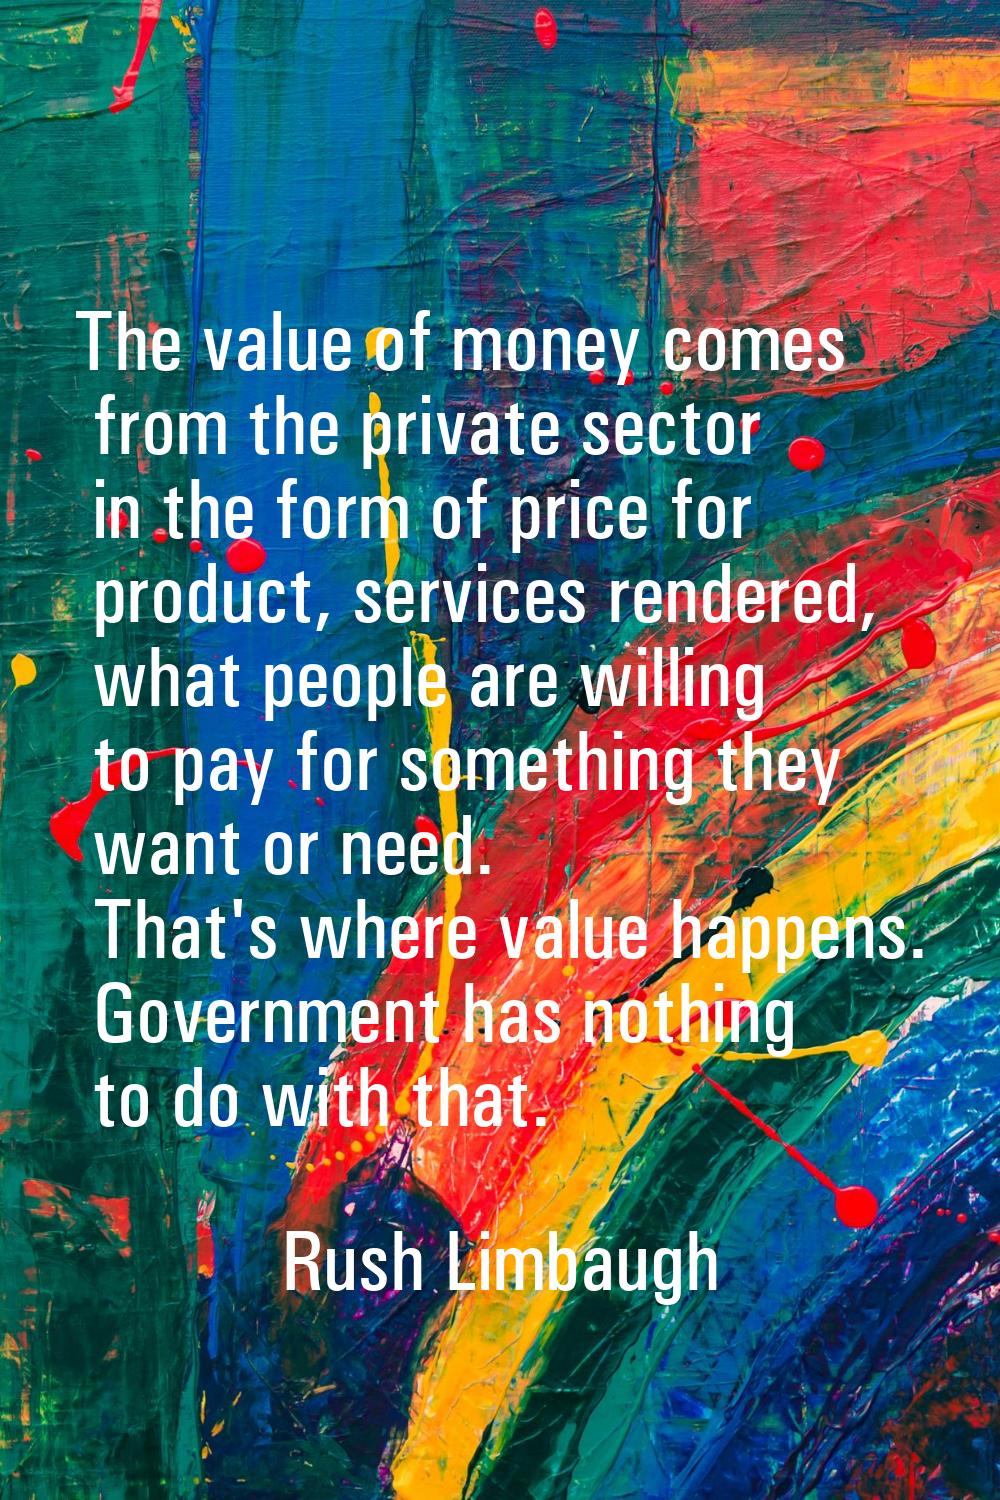 The value of money comes from the private sector in the form of price for product, services rendere